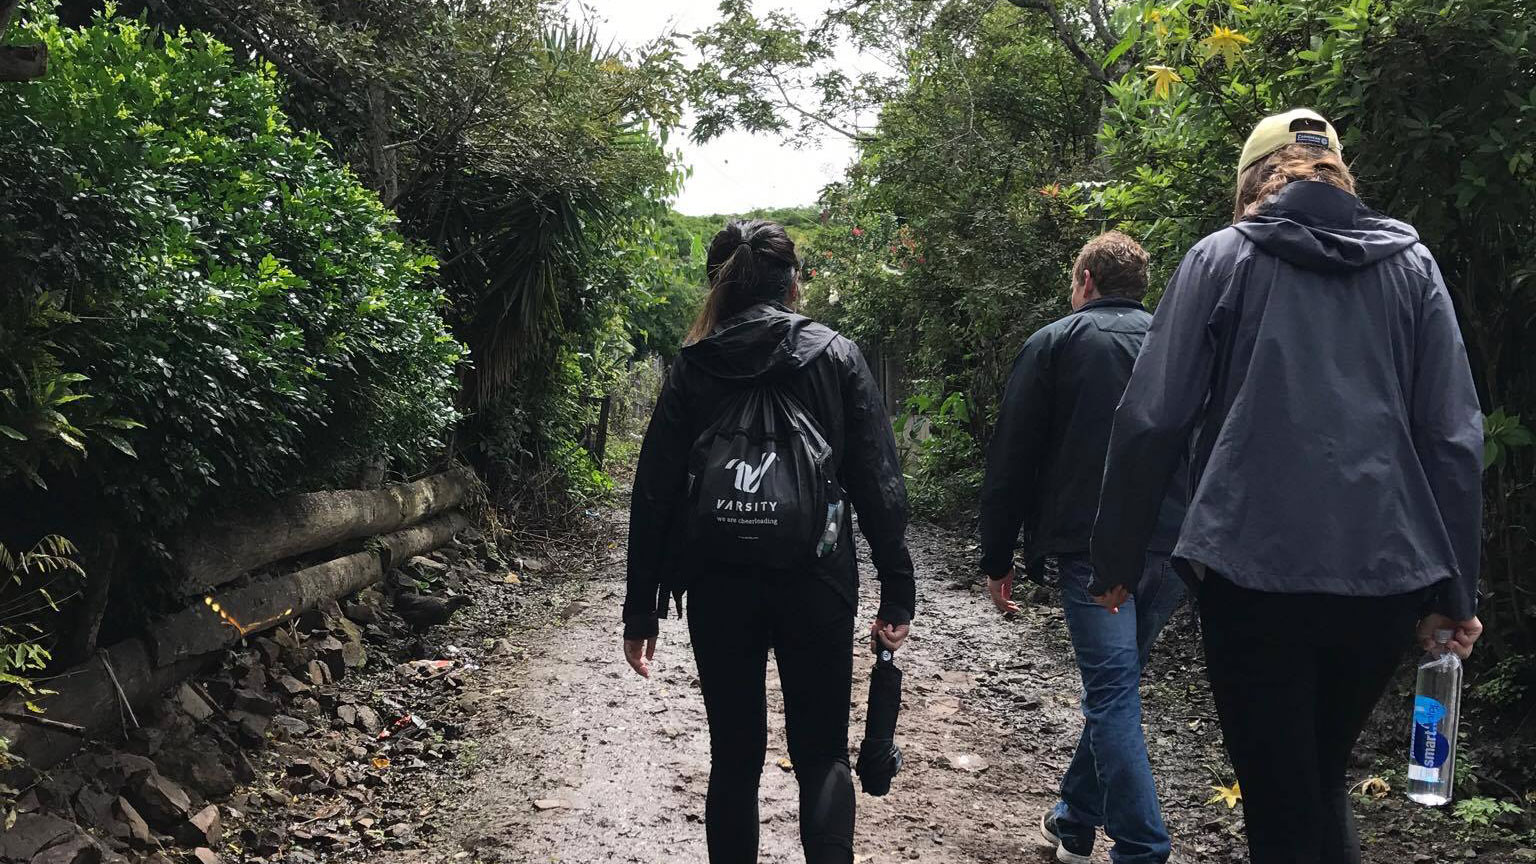 Students traversed muddy trails with the Mayo Clinic Global Medical Brigade